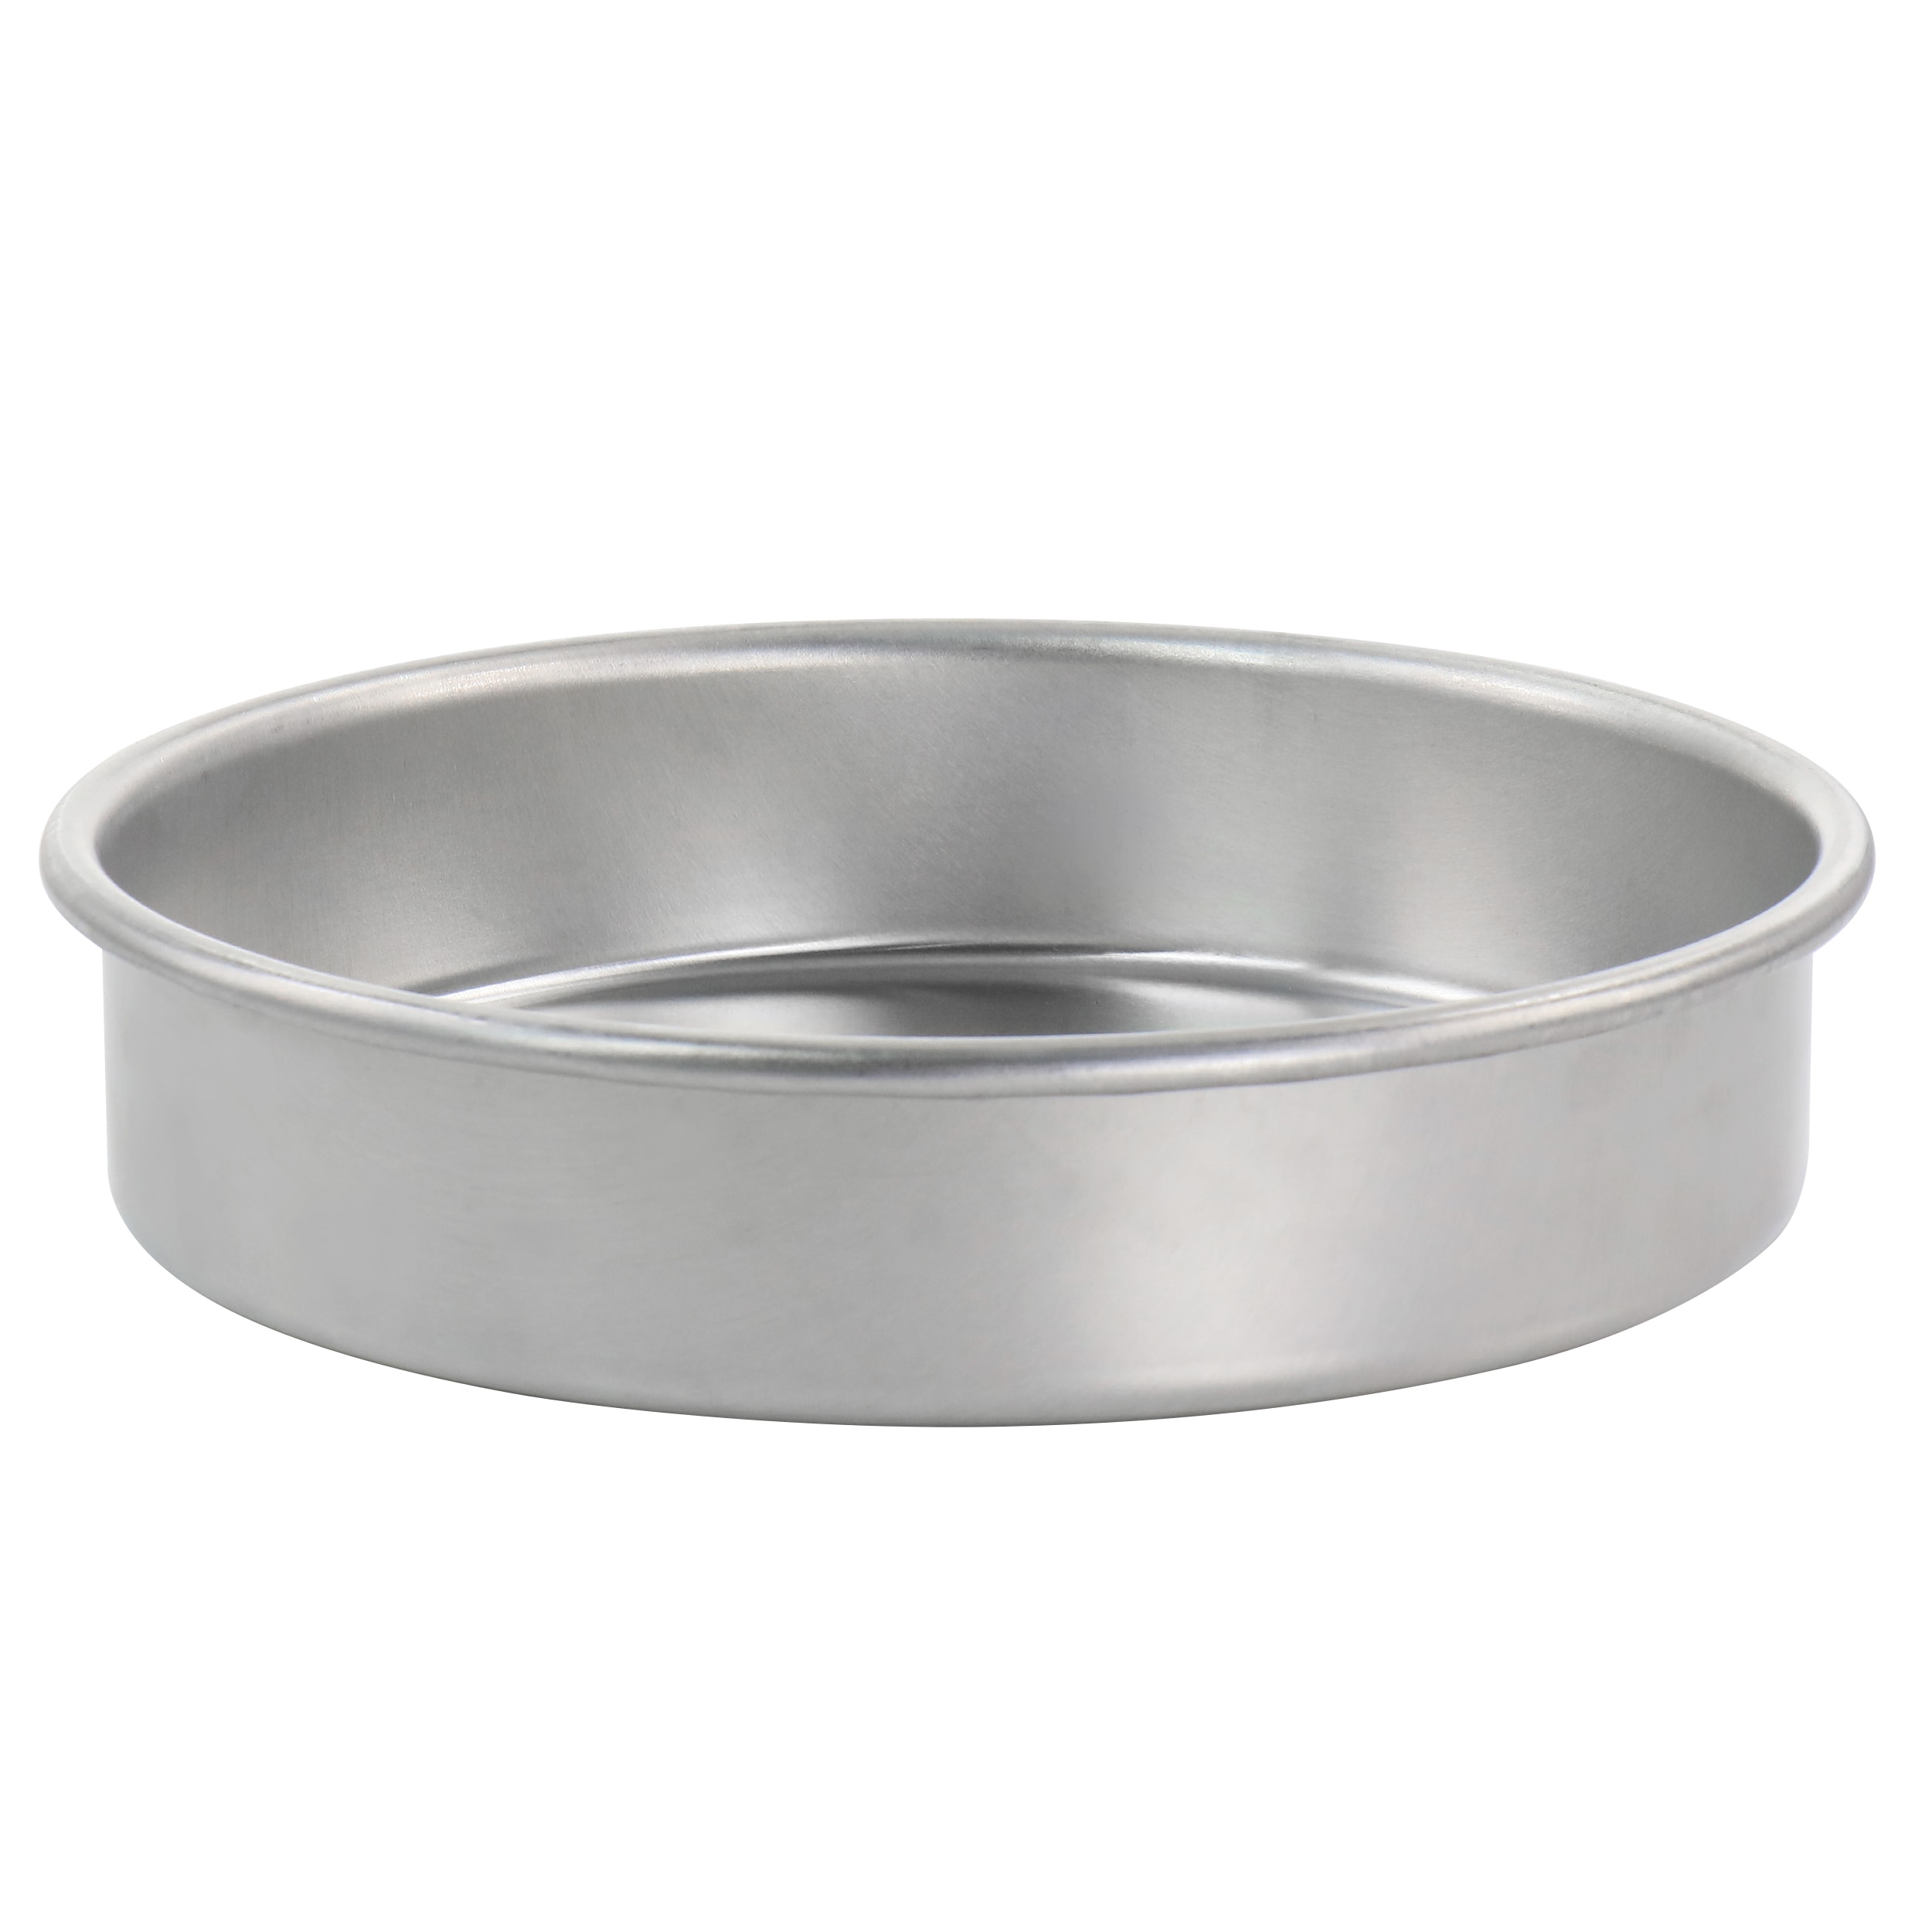 Cooking Light Carbon Steel Non-Stick Cake Pan, 13 inchx9 inch